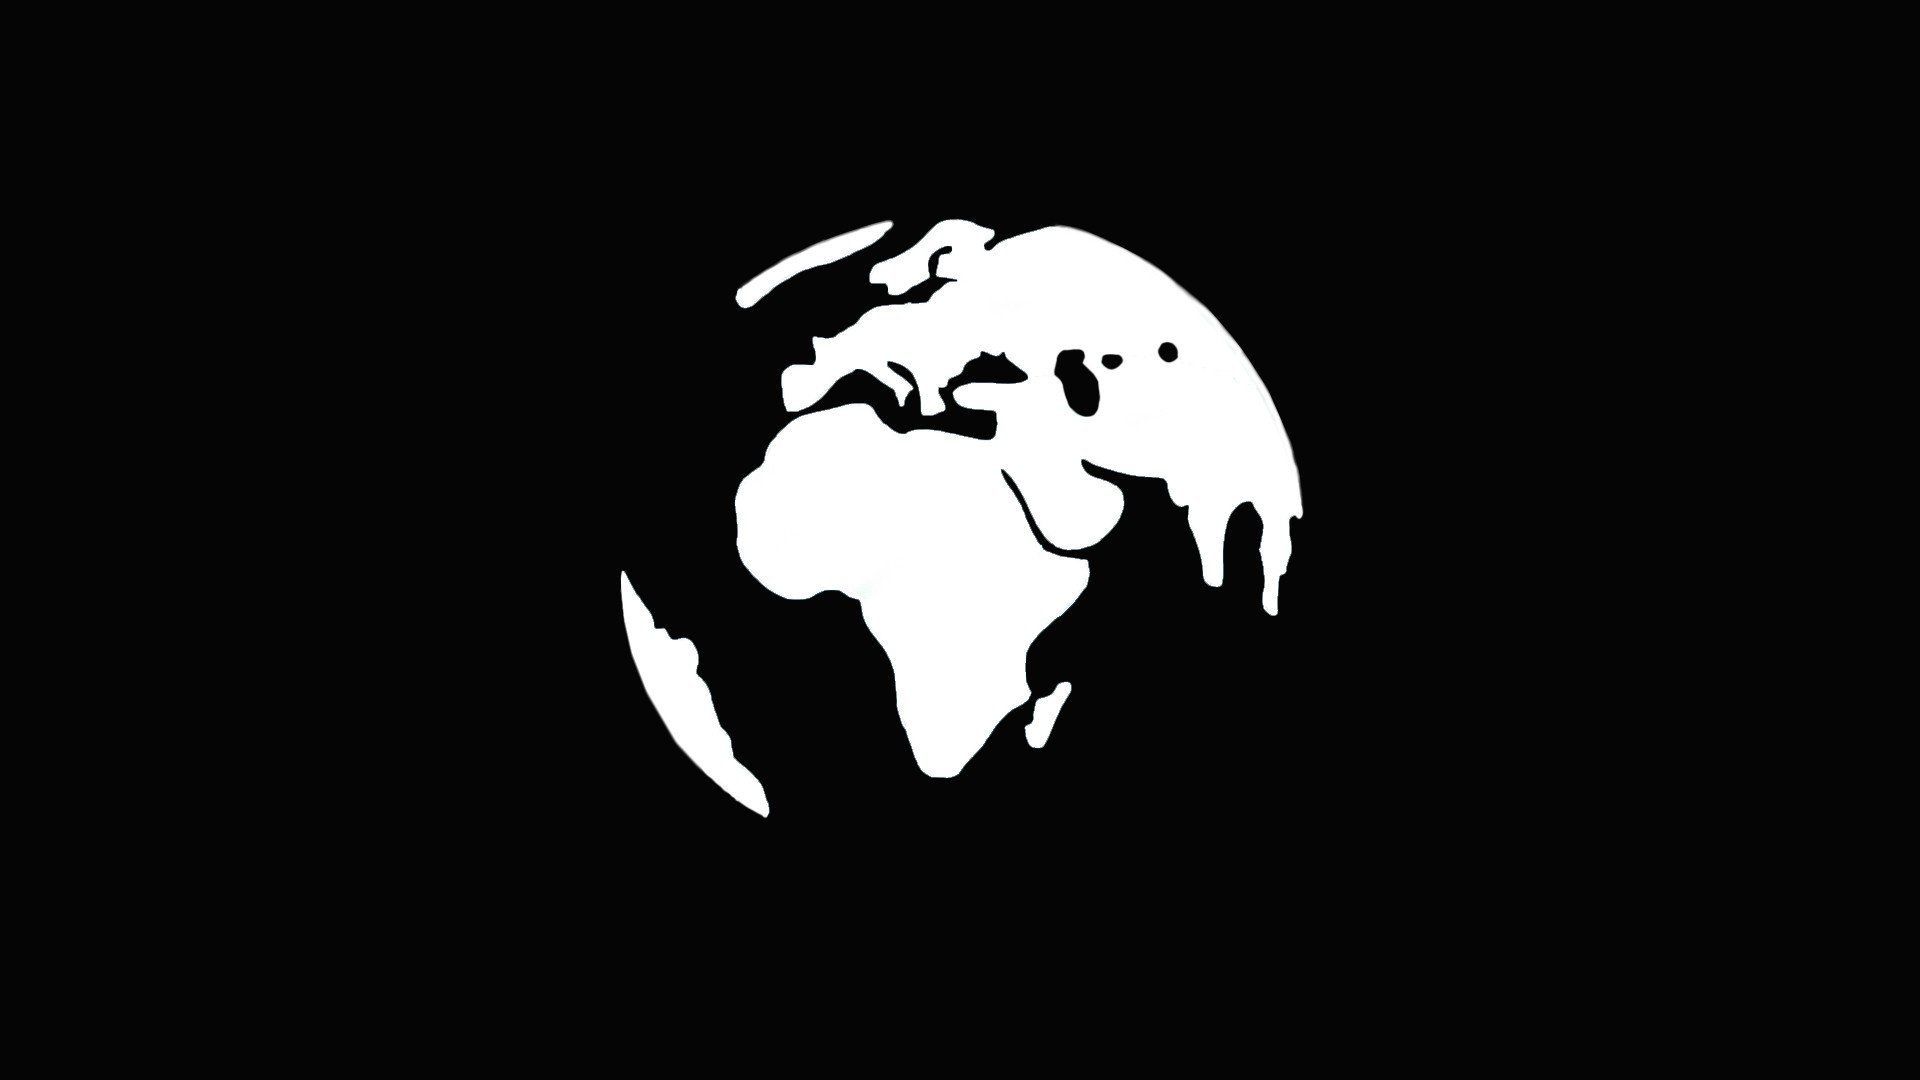 world, Minimalism, Simple, Black, White, Continents, Africa